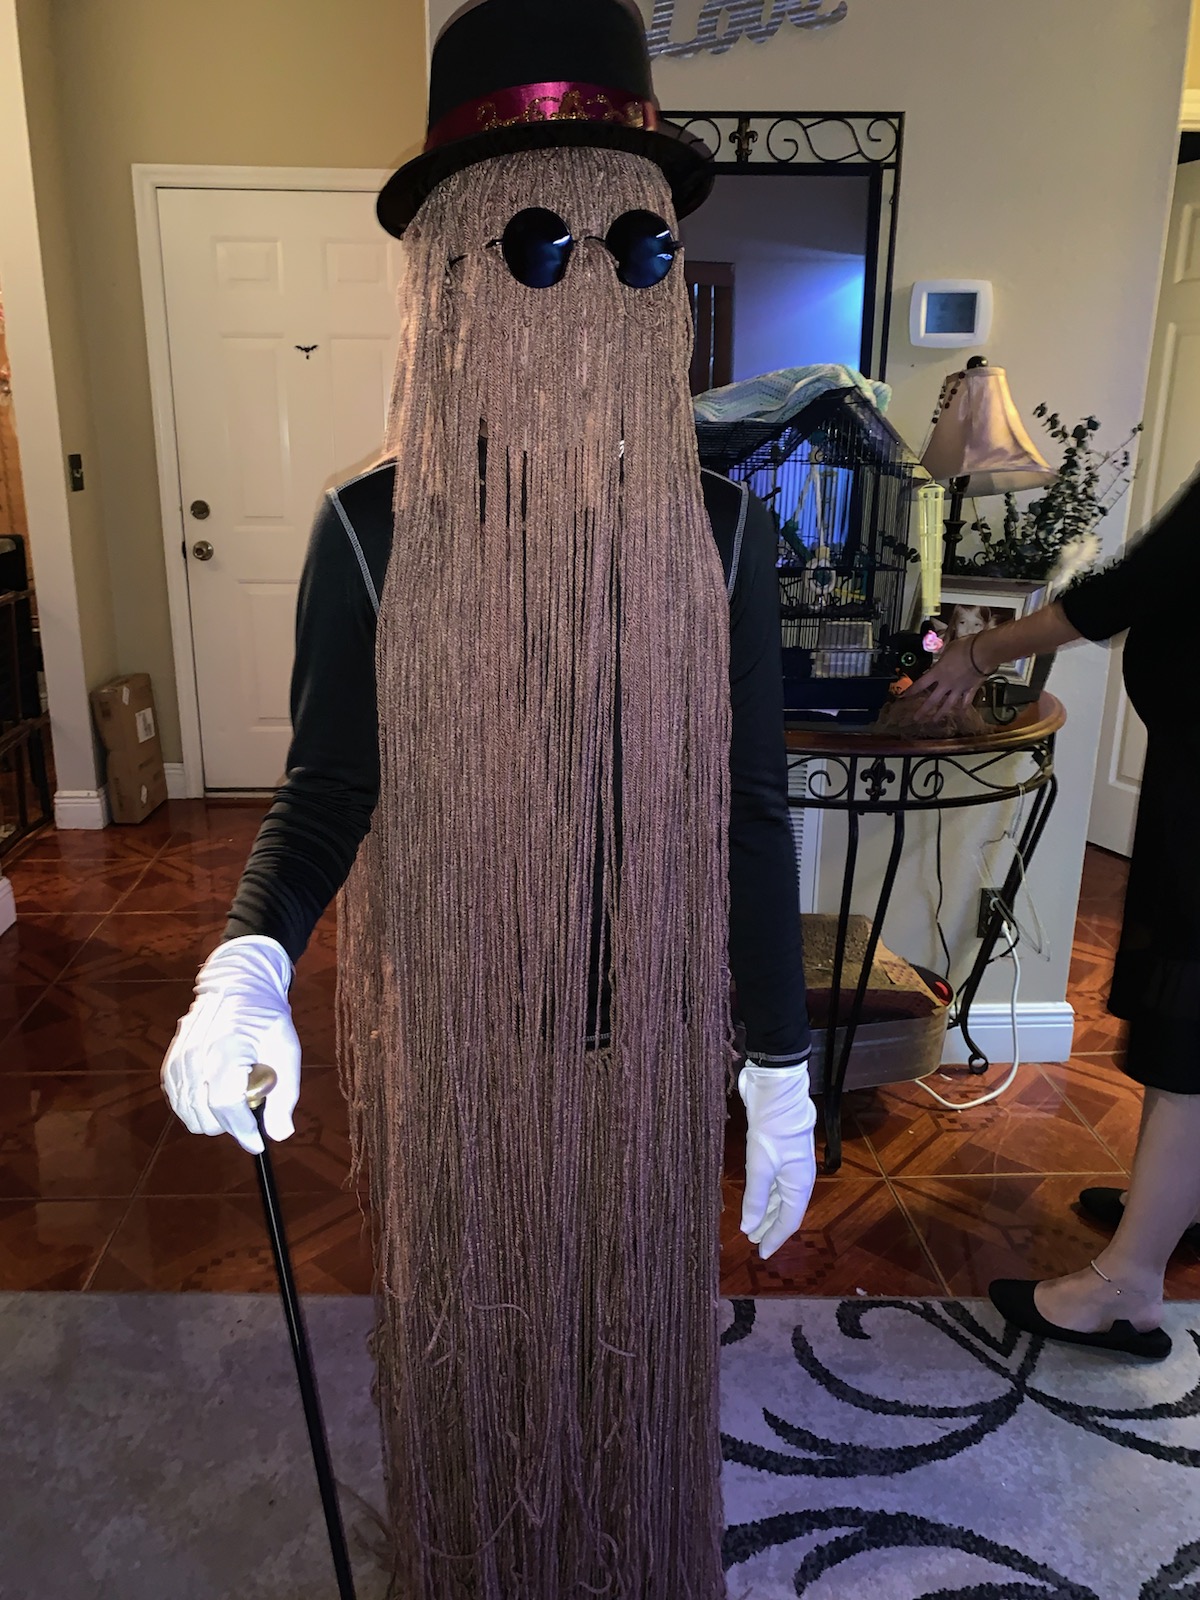 Is he creepy? Is He cooky? All together Spooky? 12 year Old Cousin It Addams Family 2 homemade cousin It from ADDAMS family 2!